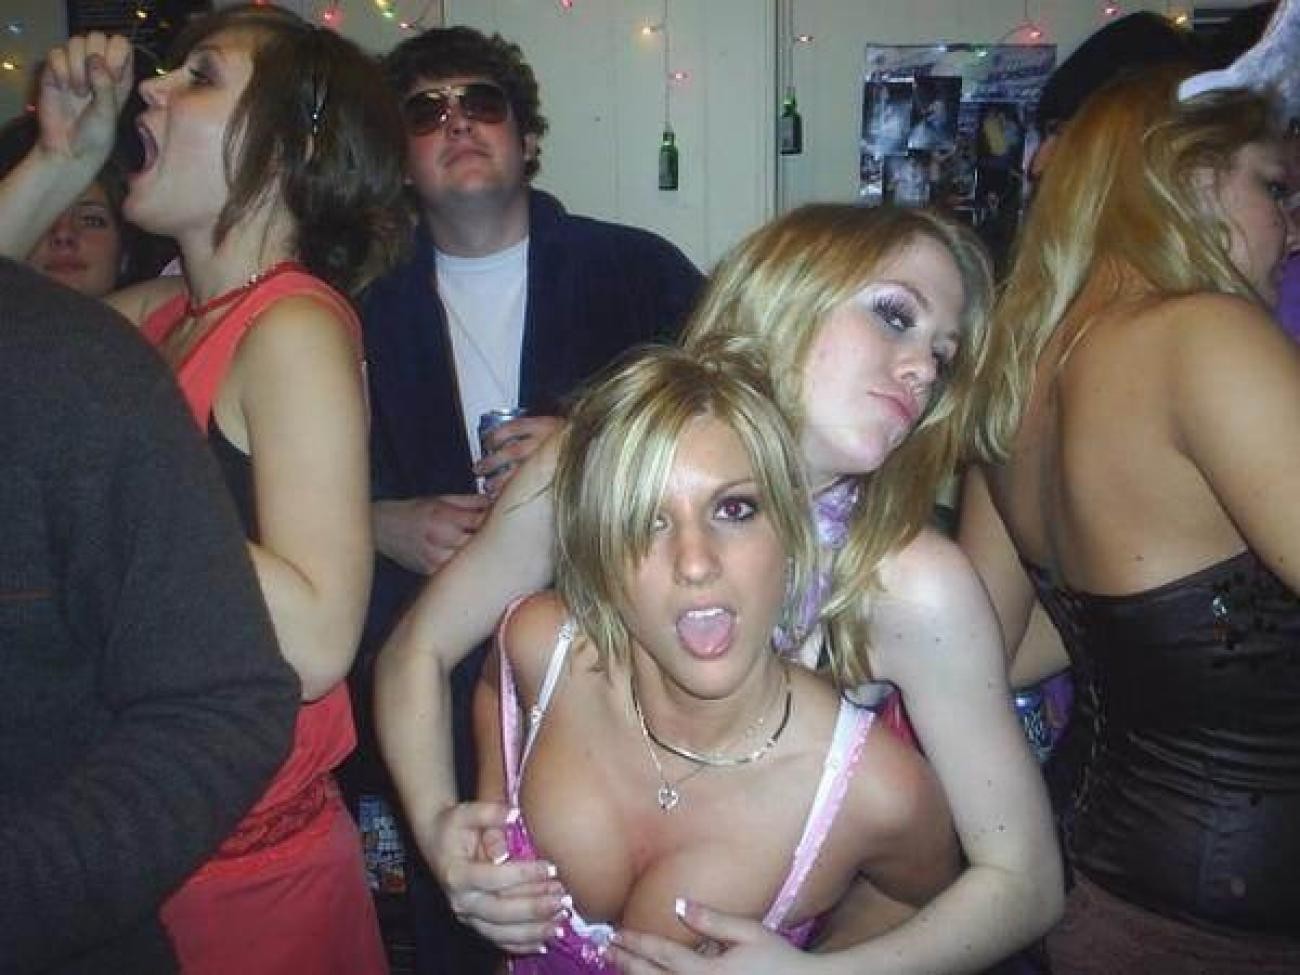 Hot pics of wild and naughty party chicks having fun #77130839